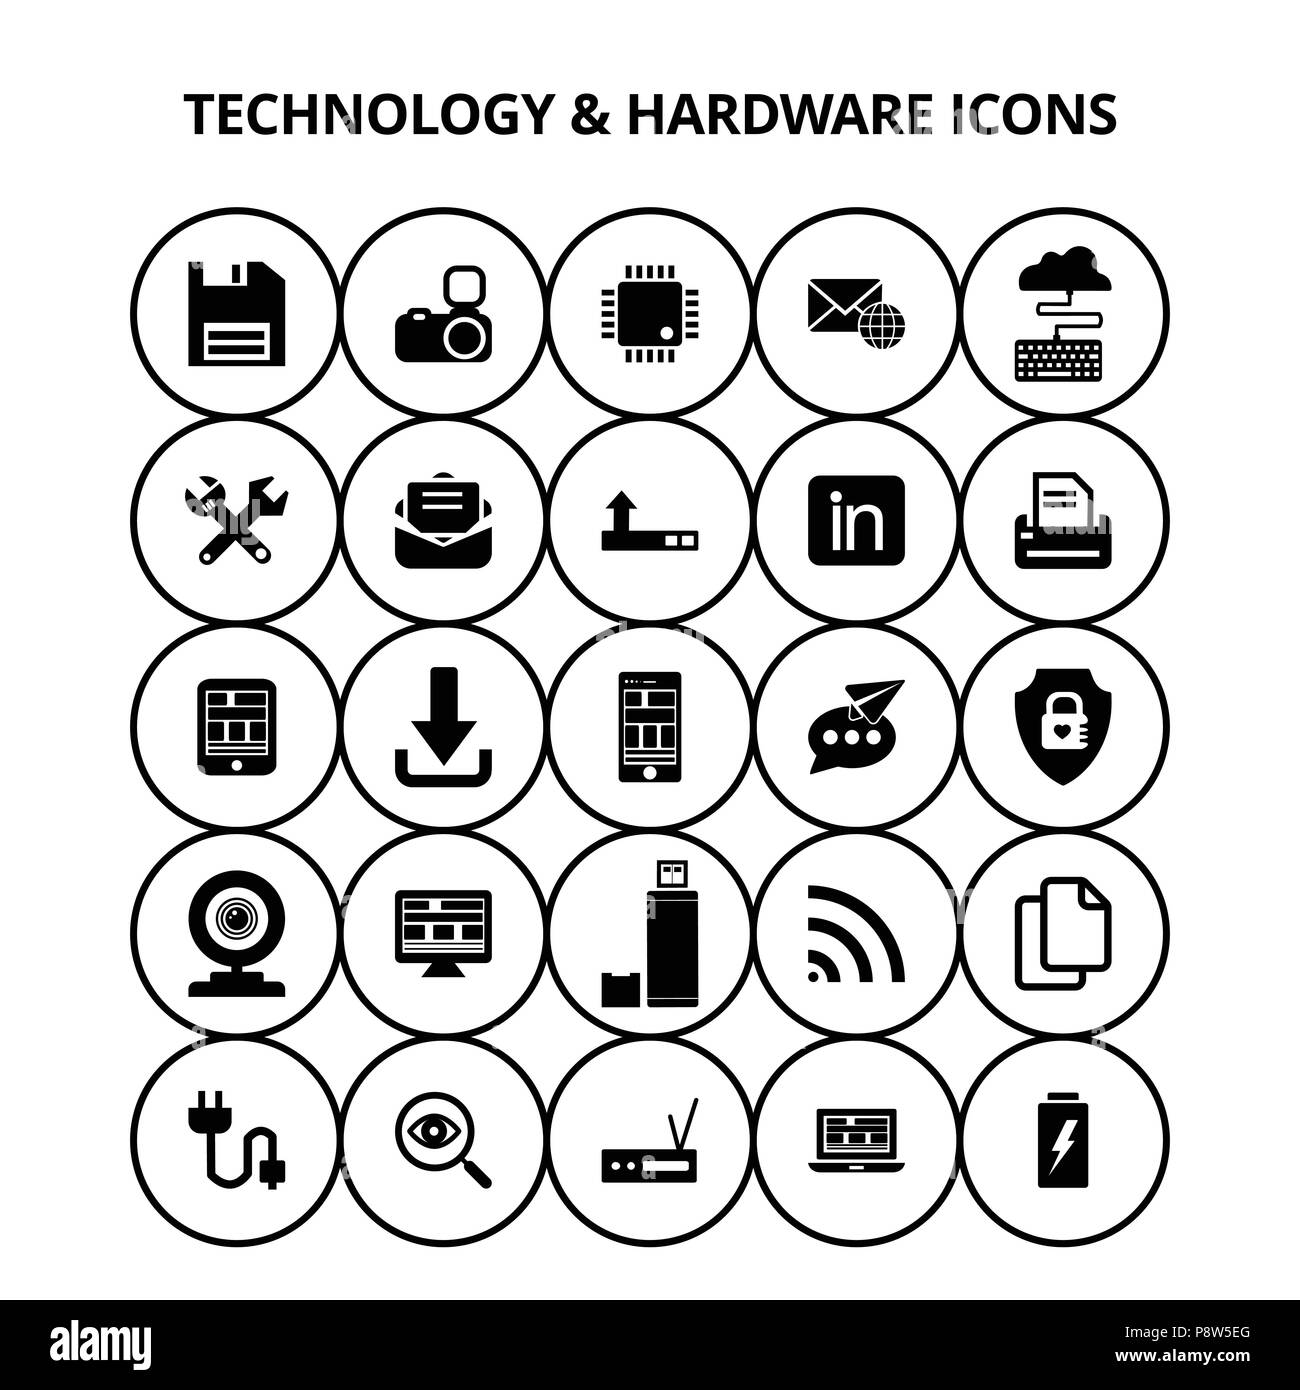 Technology and Hardware Icons. For web design and application interface, also useful for infographics. Vector illustration. Stock Vector